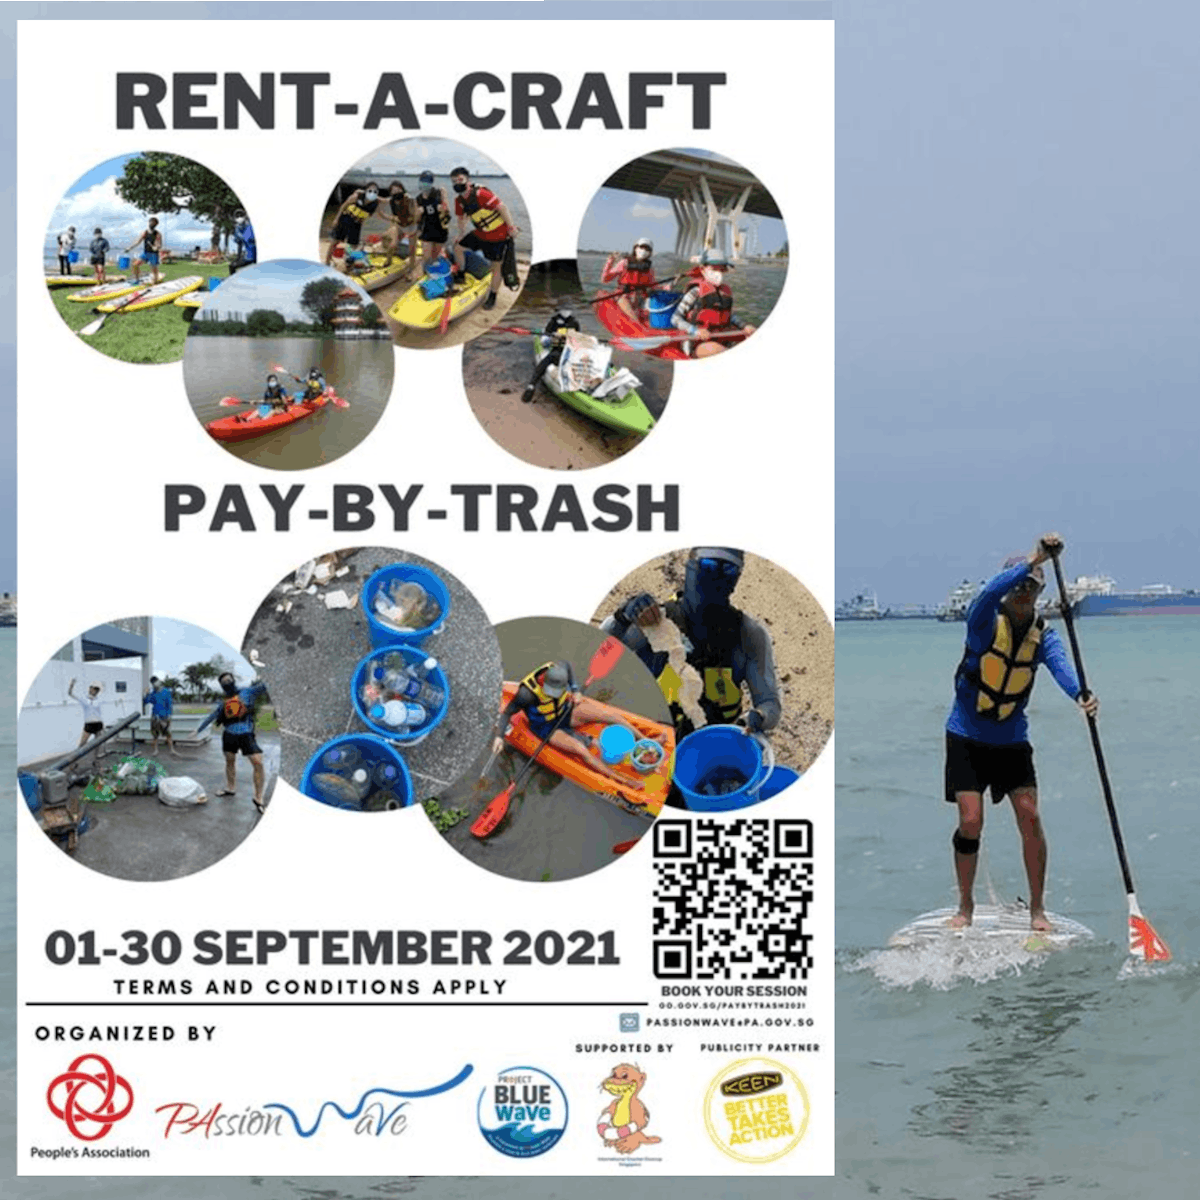 PAssion WaVe: Rent-a Craft, Pay-by-Trash’ campaign